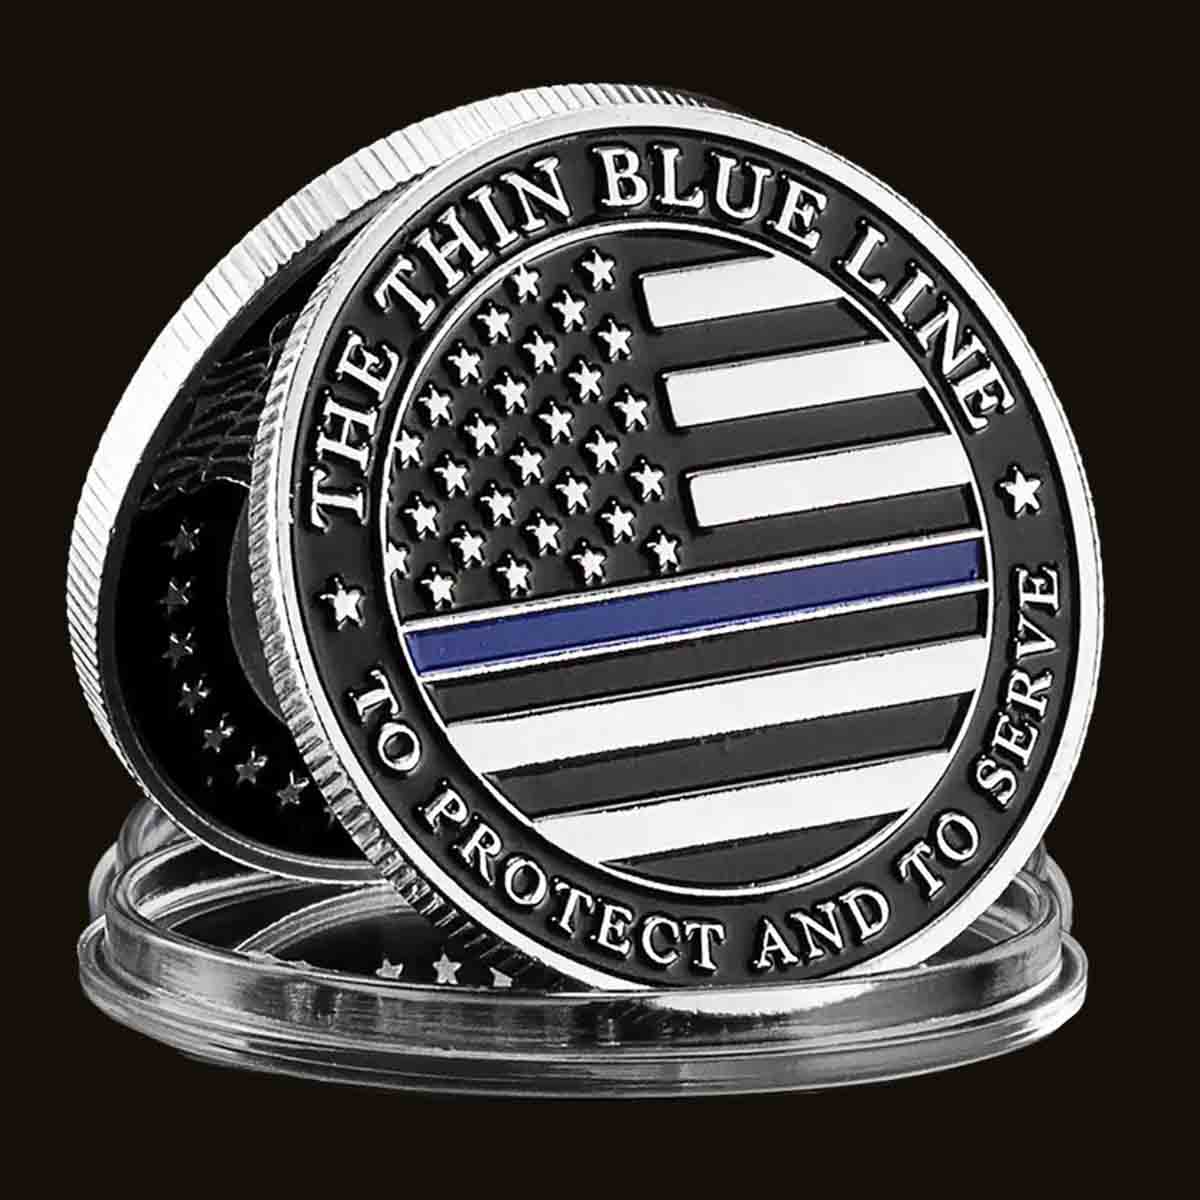 Police Officer Commemorative Challenge Coin. High-quality Silver plating for a stunning shine and durability. Perfect to honor the bravery and sacrifice of police officers. This coin comes in a protective plastic case to preserve its beauty and value. Patriot Gear USA